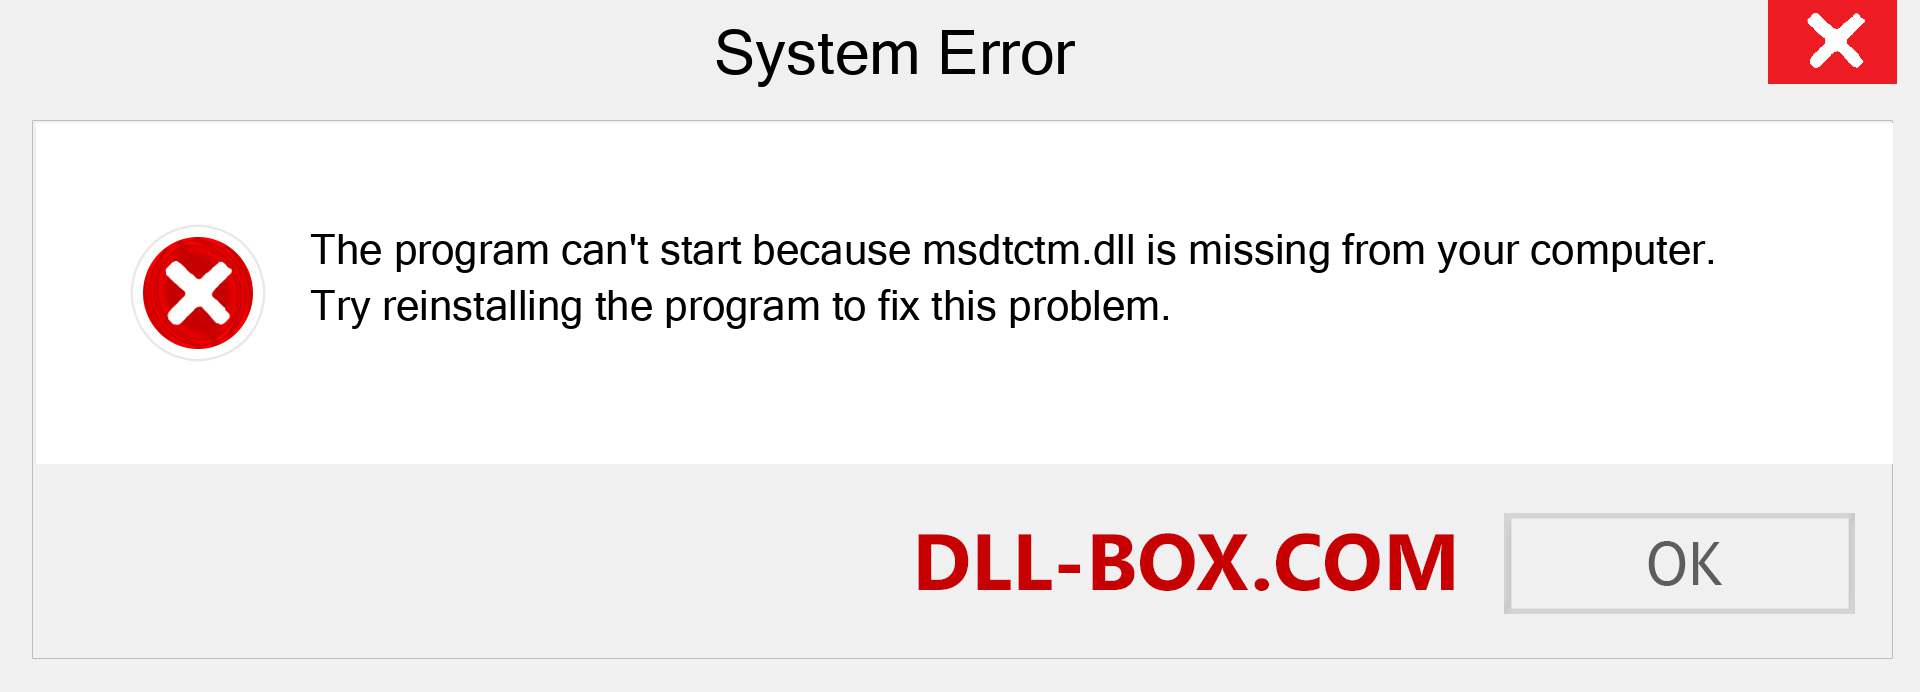  msdtctm.dll file is missing?. Download for Windows 7, 8, 10 - Fix  msdtctm dll Missing Error on Windows, photos, images